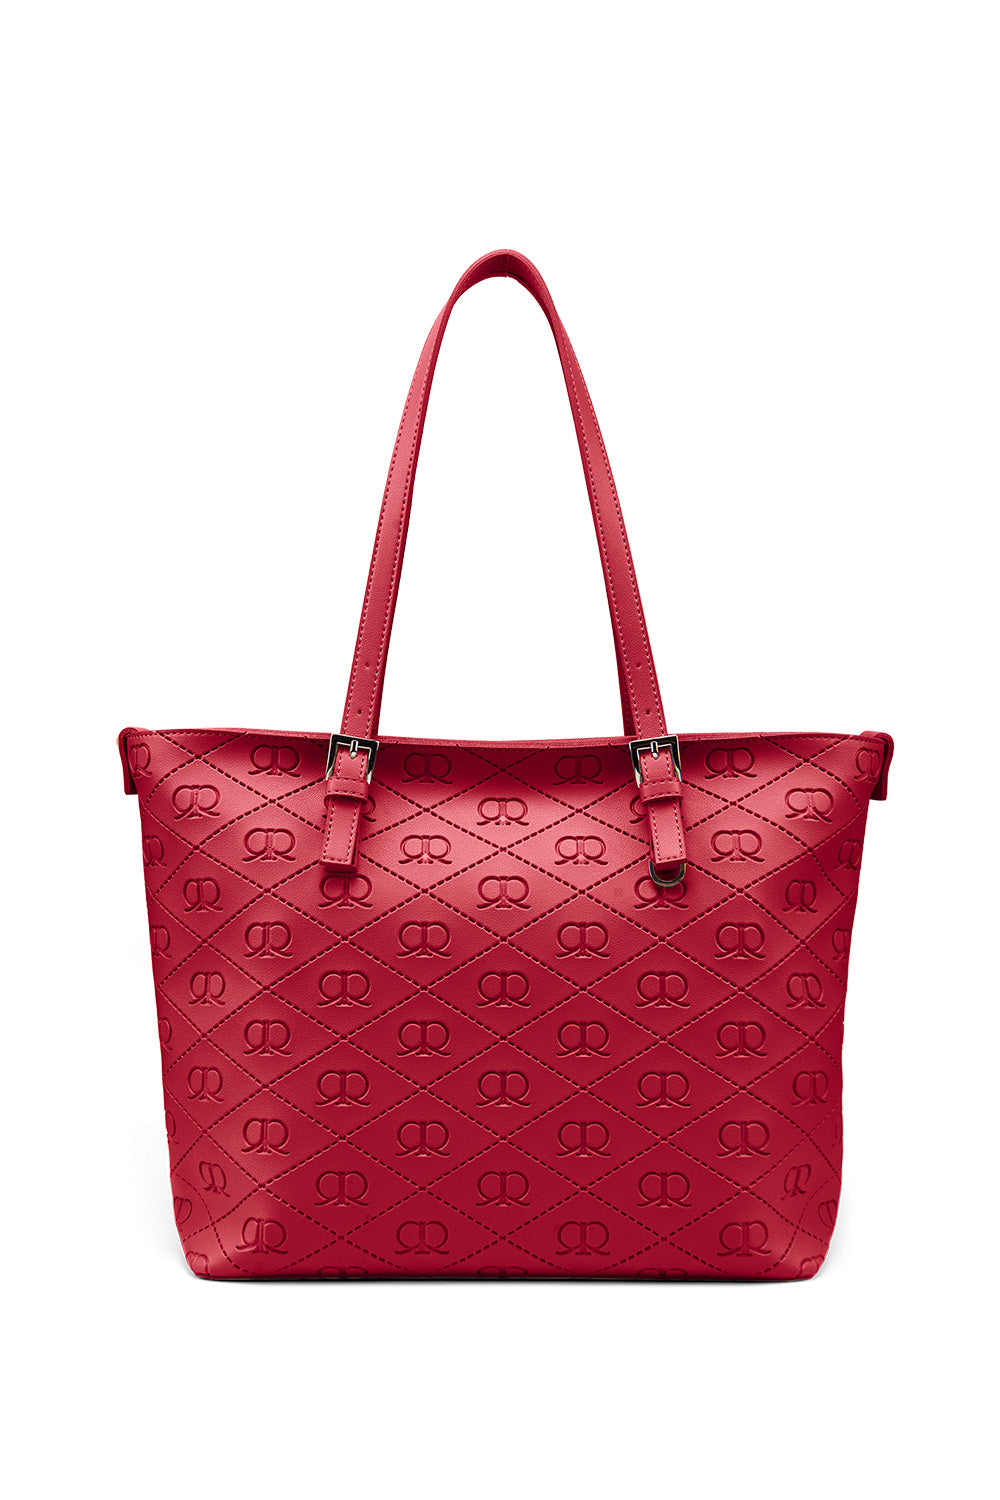 RR Basic Tote in Red